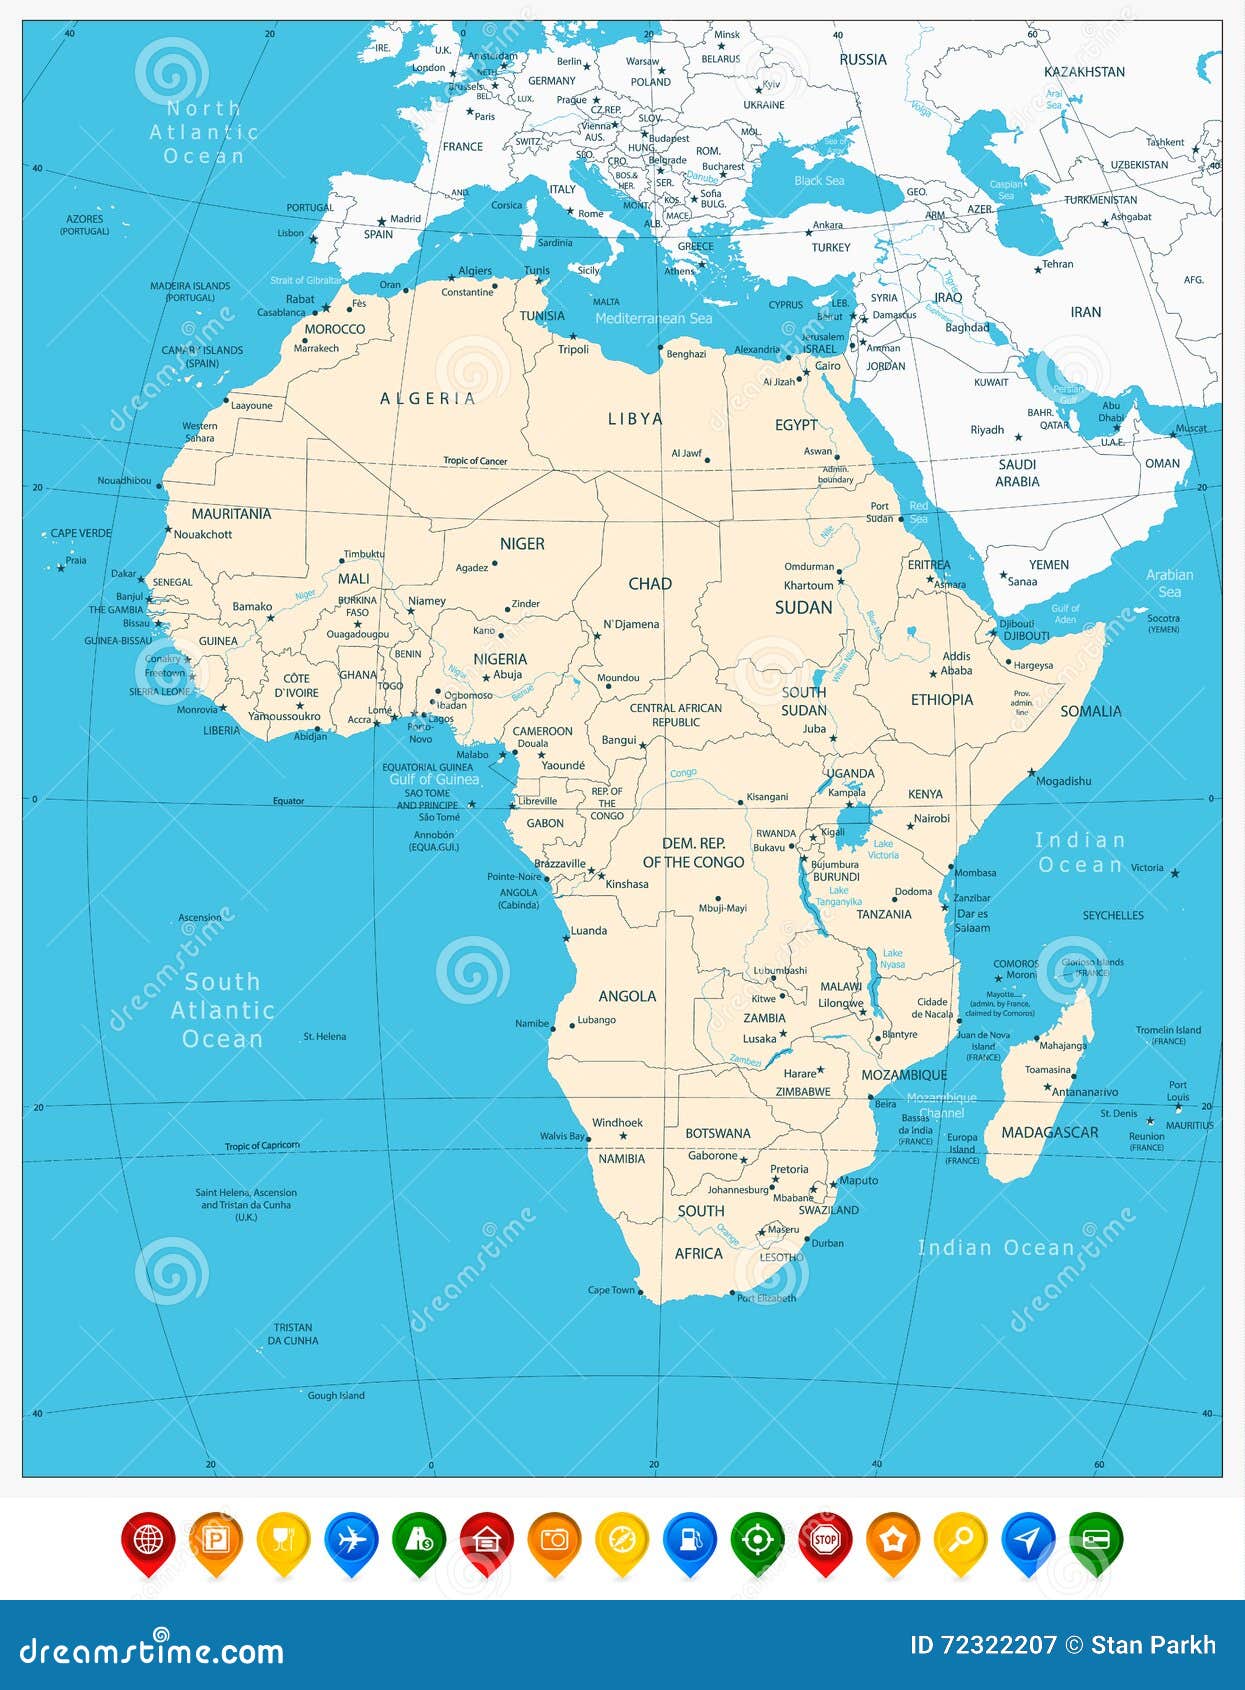 Africa Highly Detailed Map and Colored Map Pointers Stock Vector ...